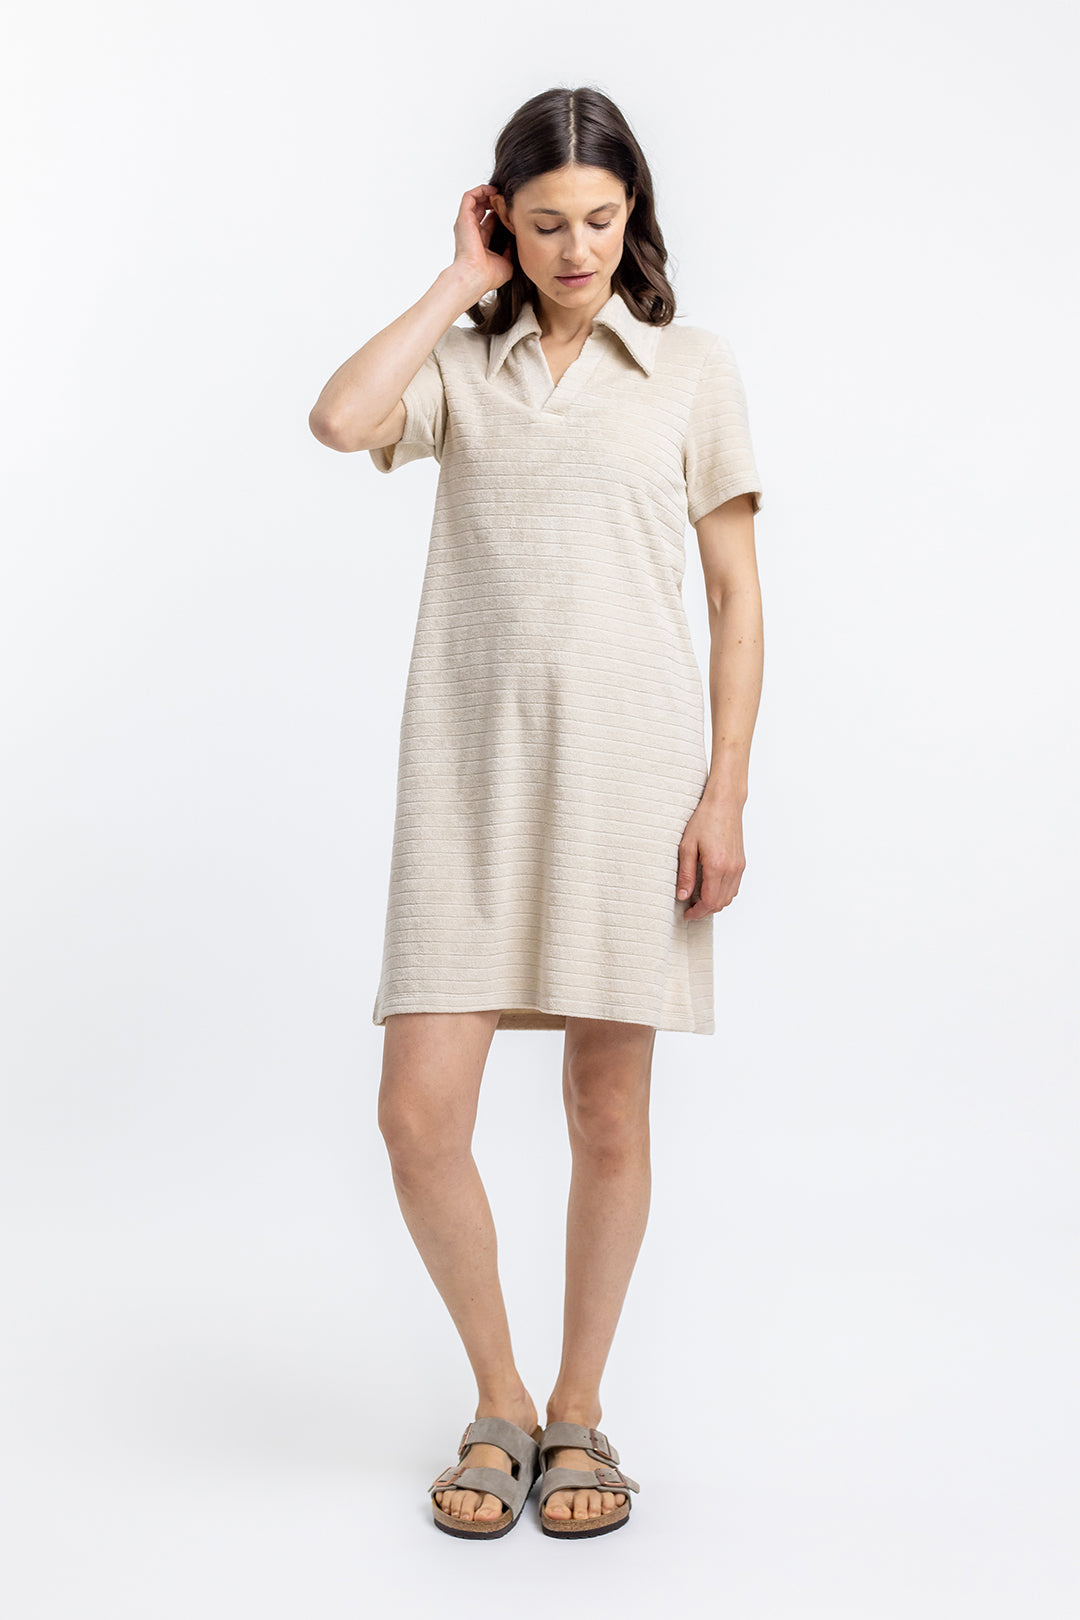 Beige polo dress made from 100% organic cotton from Rotholz